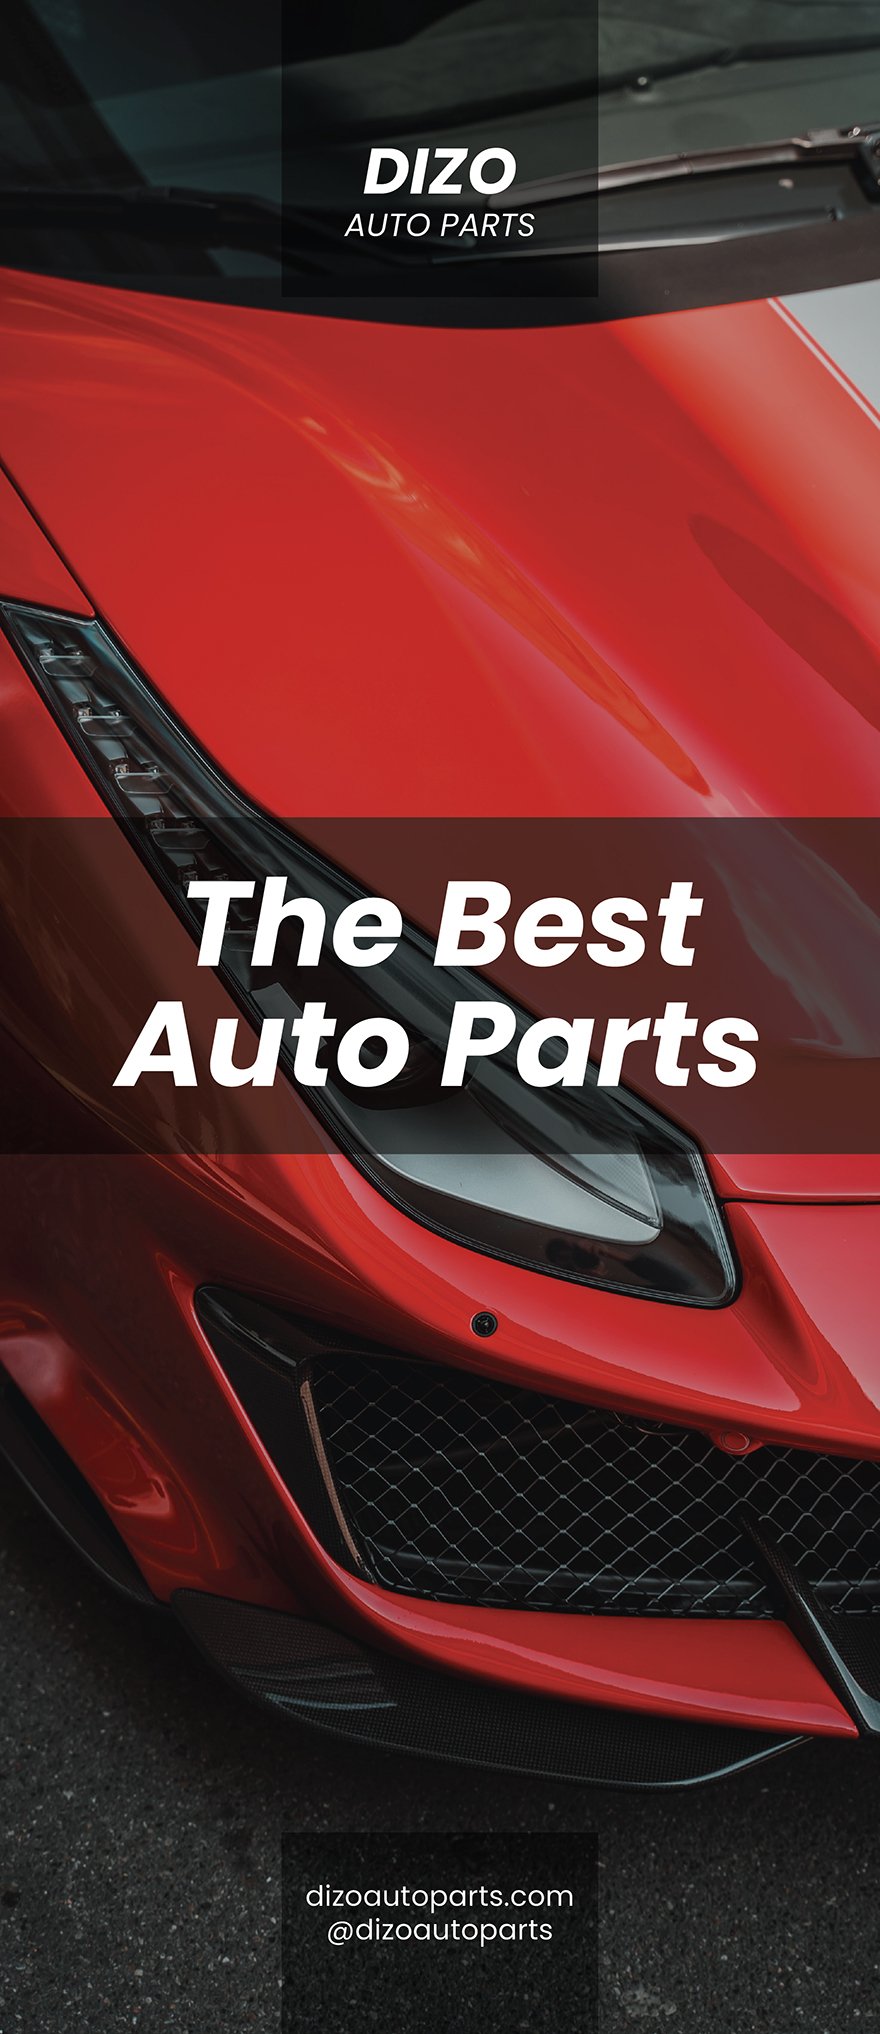 Free Auto Parts Roll Up Banner Template